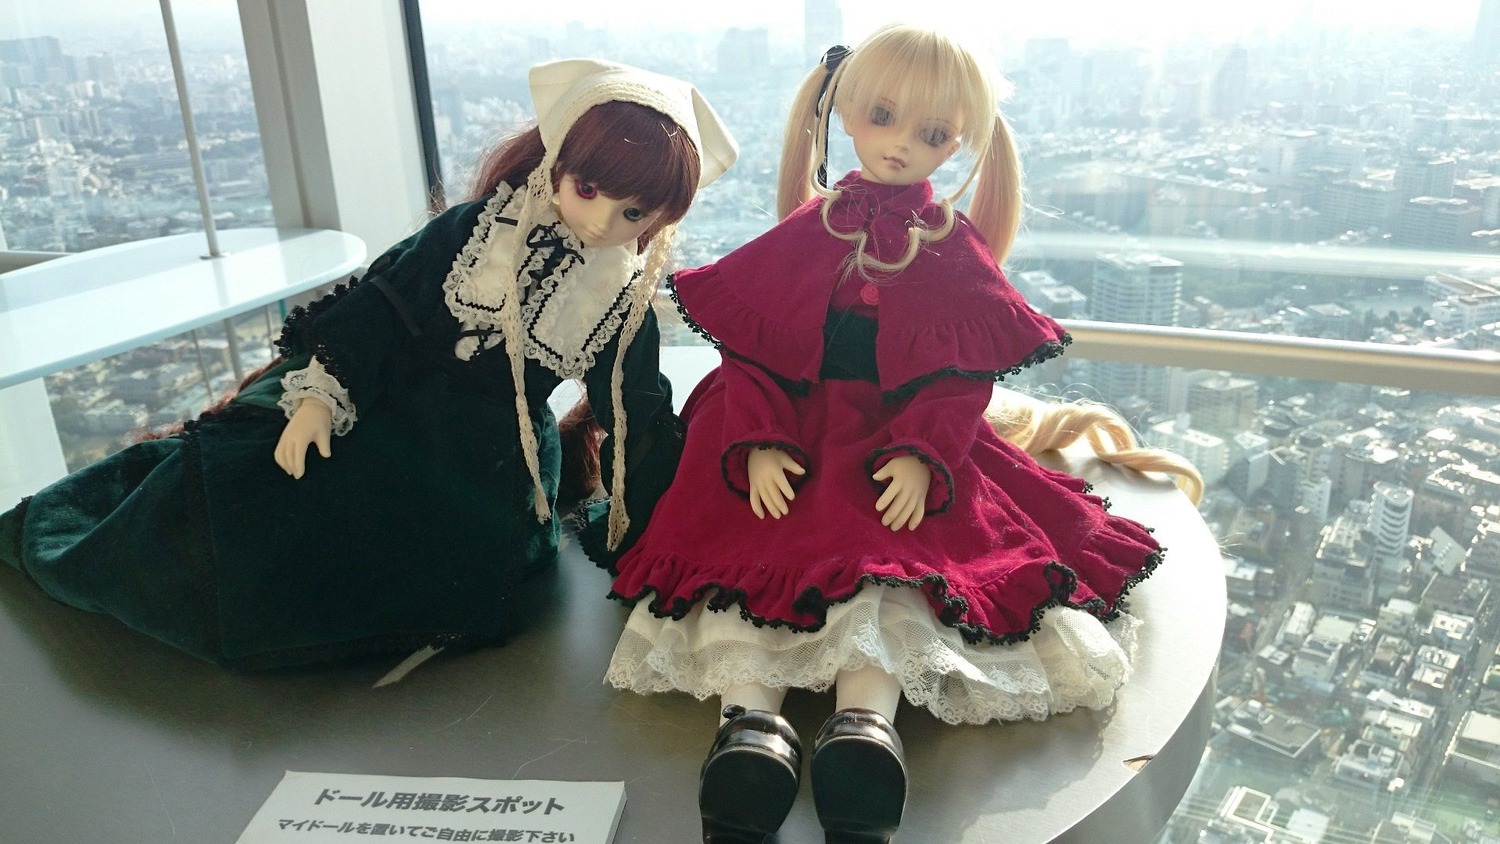 2girls blonde_hair bonnet brown_hair capelet doll dress long_hair long_sleeves looking_at_viewer multiple_dolls multiple_girls red_dress sitting standing tagme twins twintails